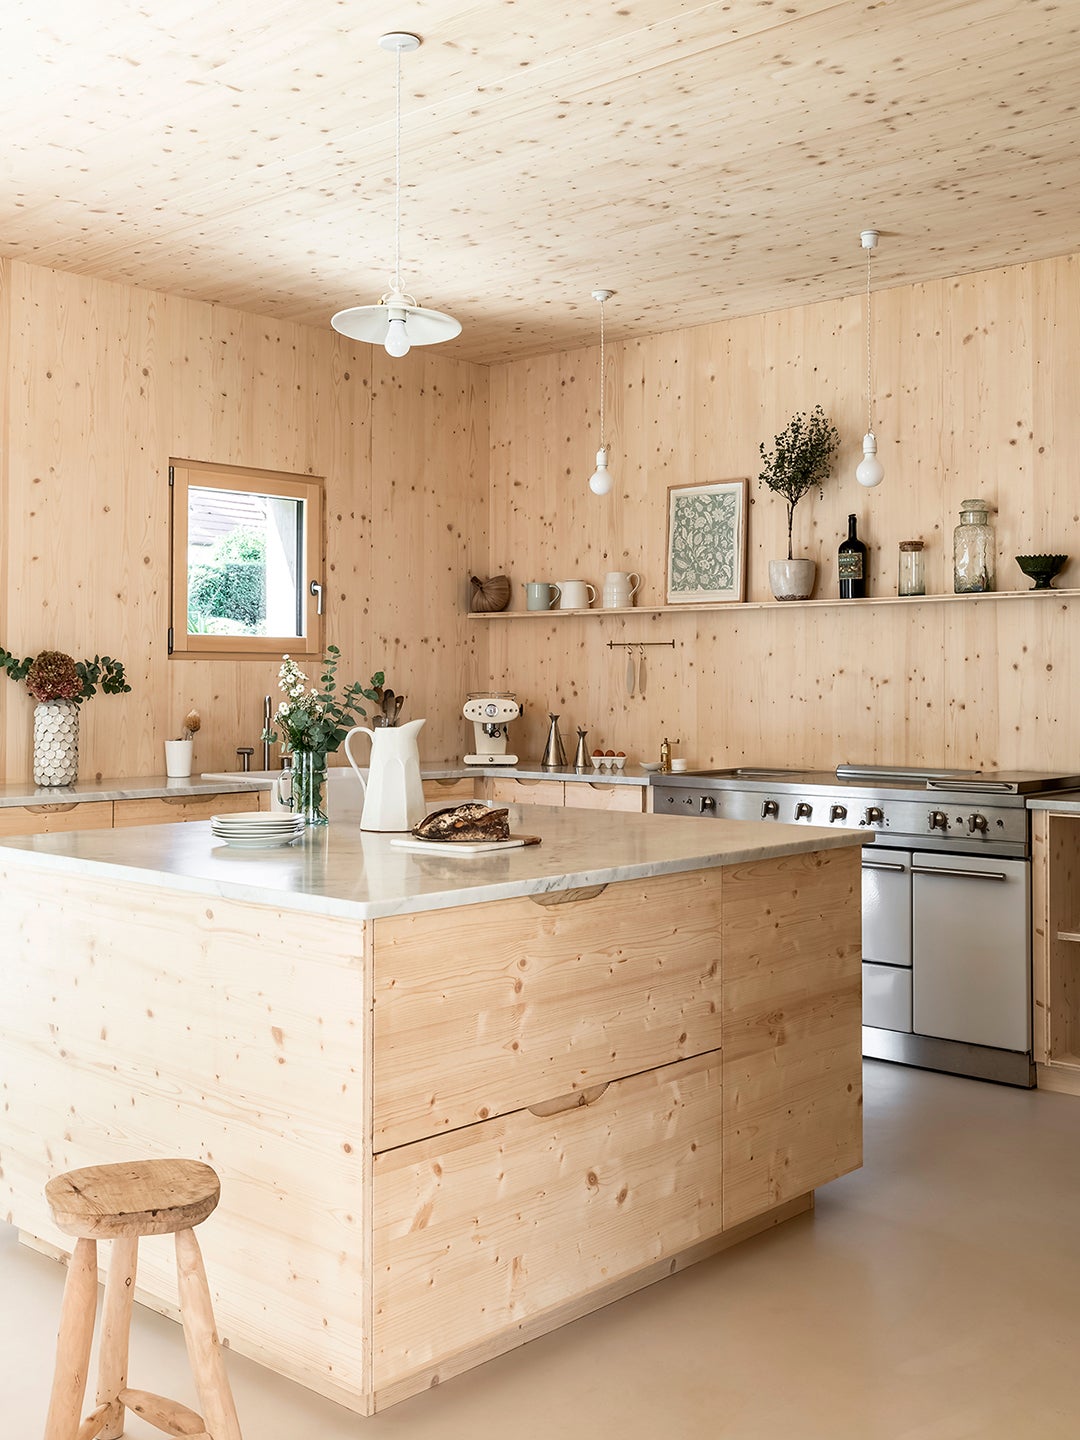 pine-covered kitchen